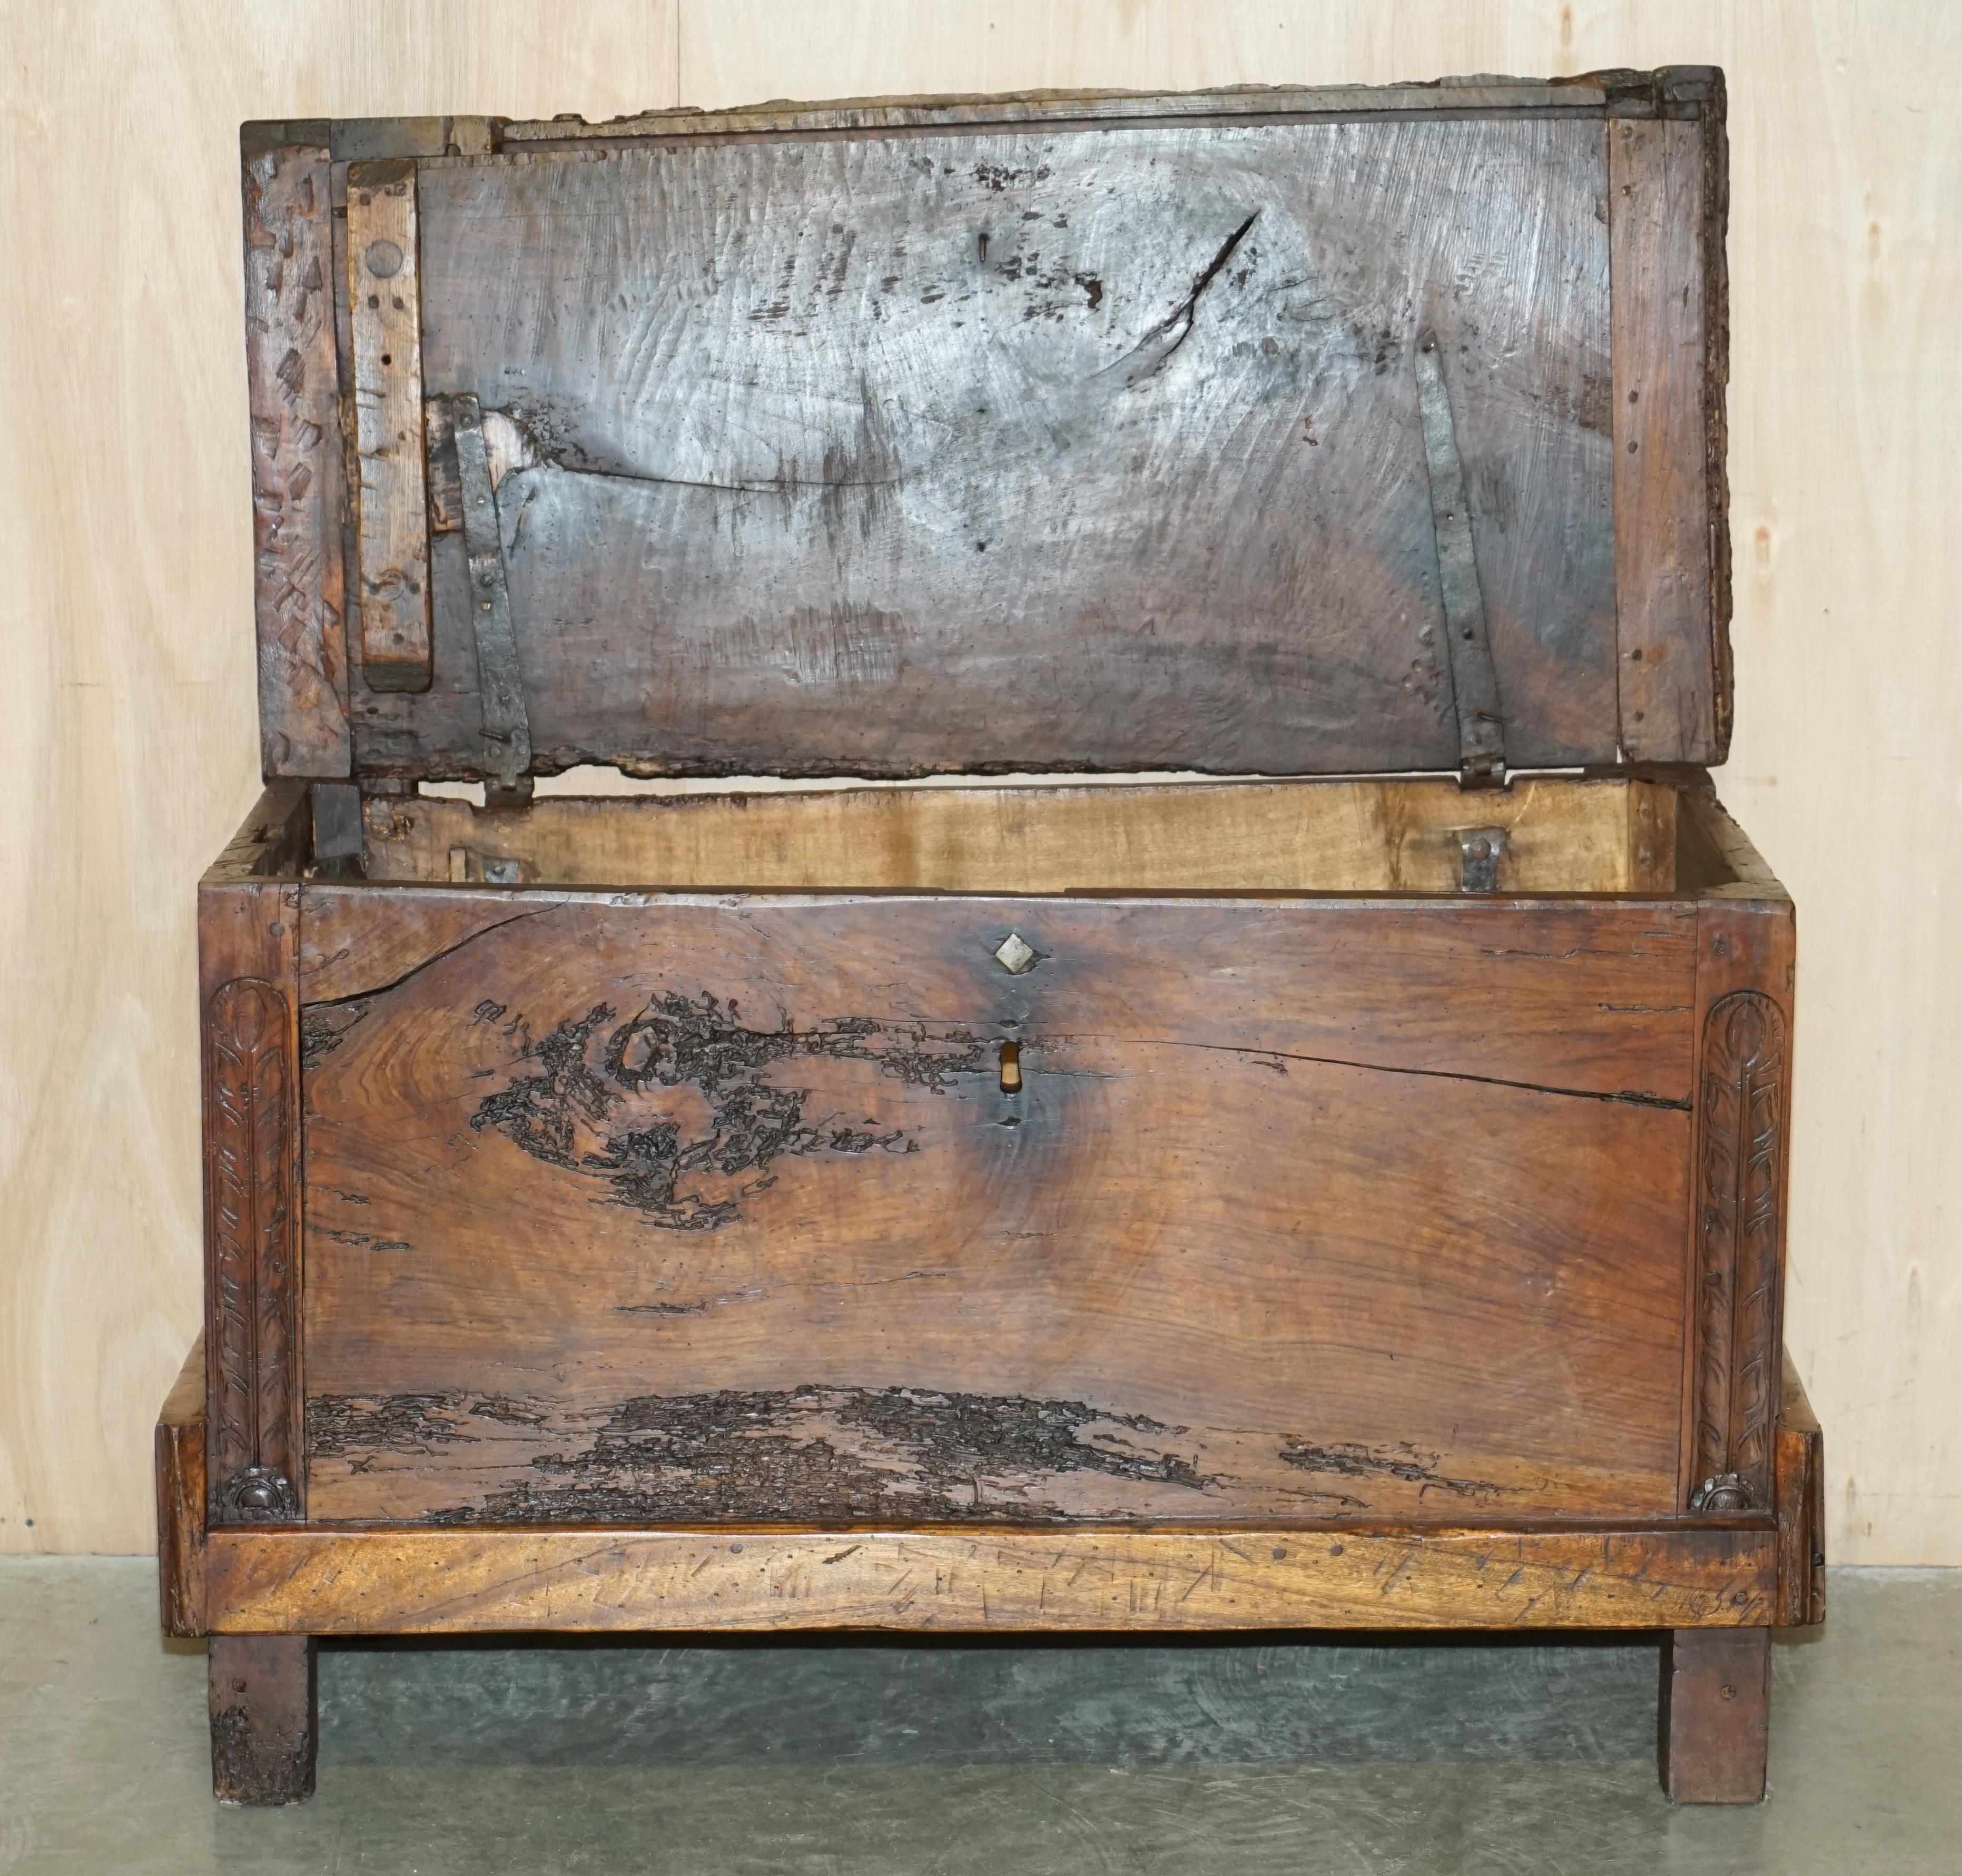 ANTiQUE 18TH CENTURY SIX PLANK HEAVILY BURRED CHESTNUT WOOD TRUNK CHEST For Sale 12